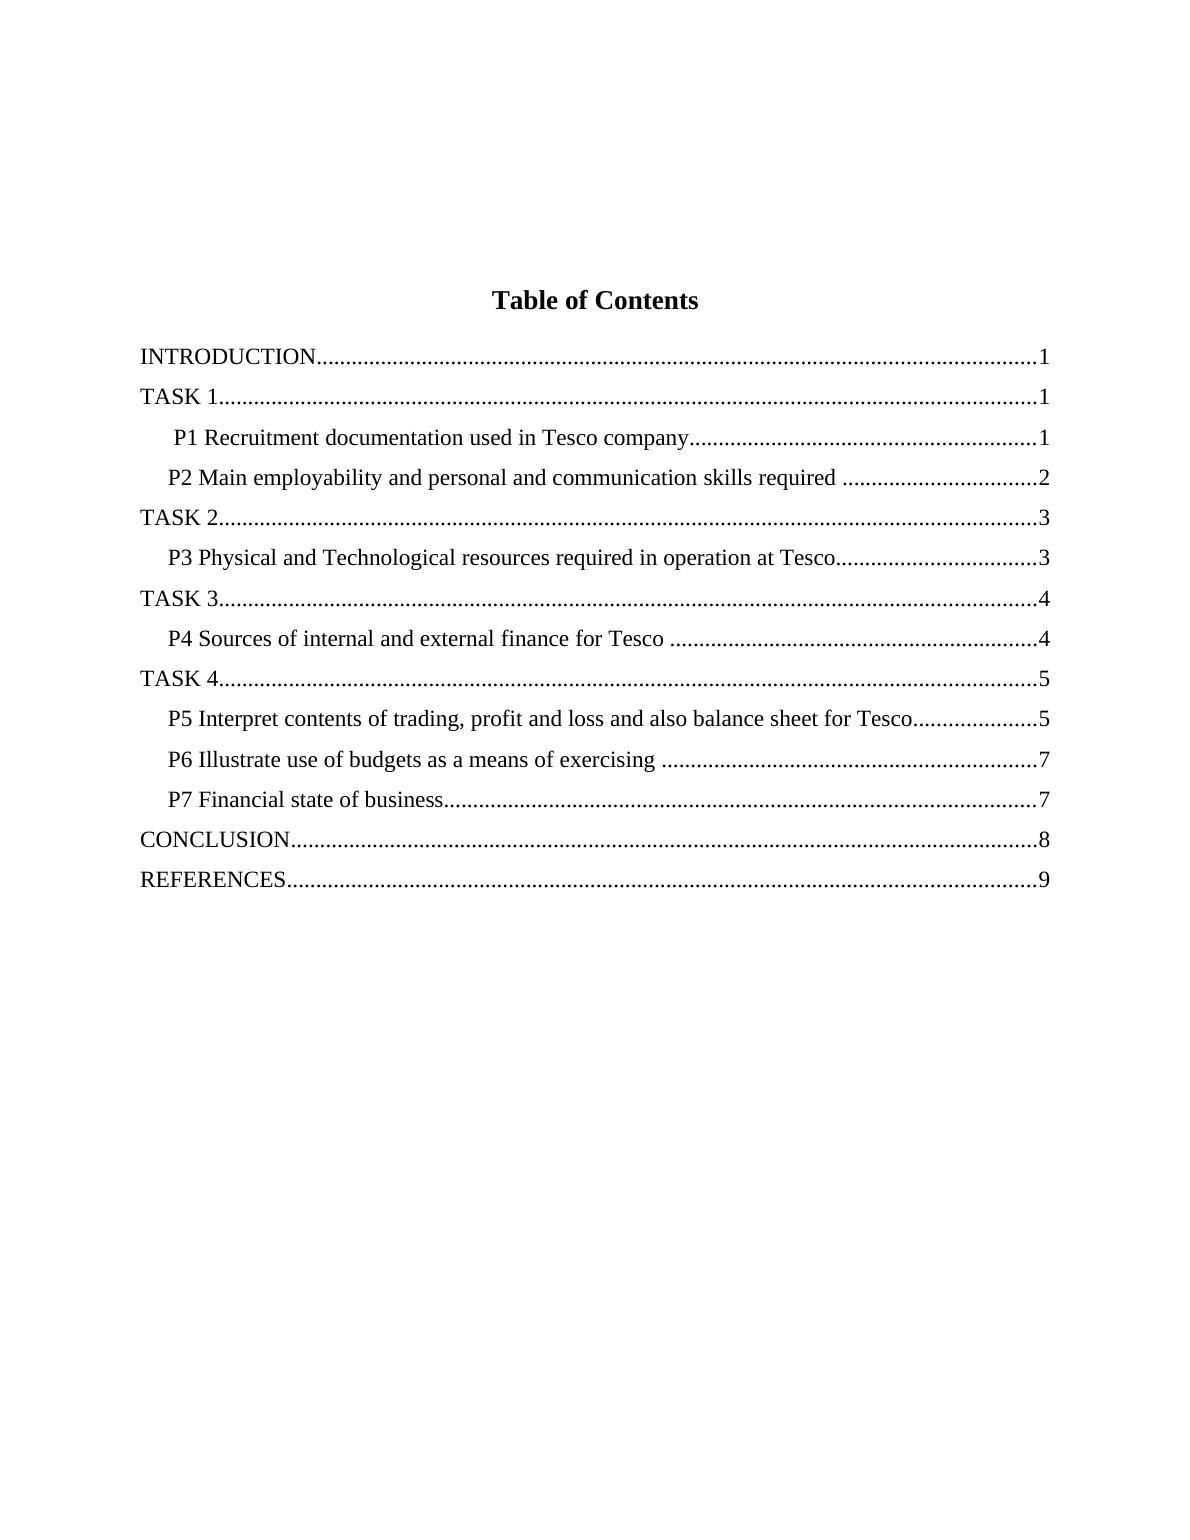 Essay on Business Resources - Tesco_2